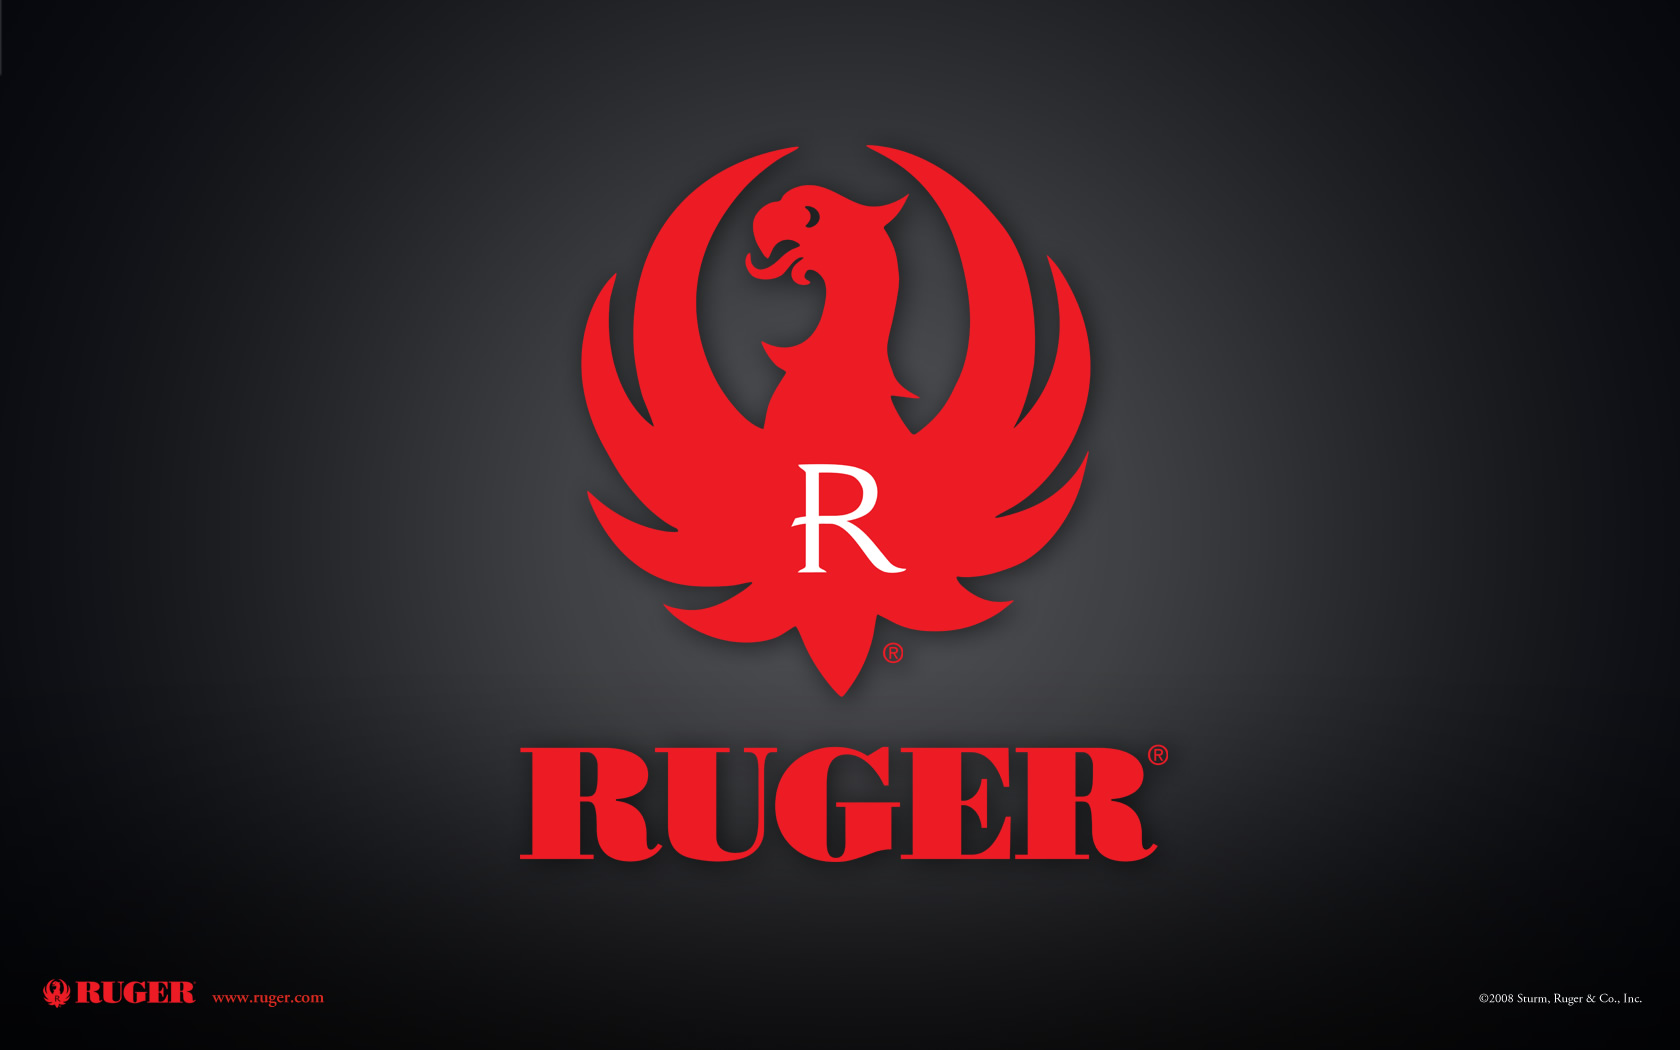 Ruger S Arizona Facility Suffers Storm Damage Resumes Production